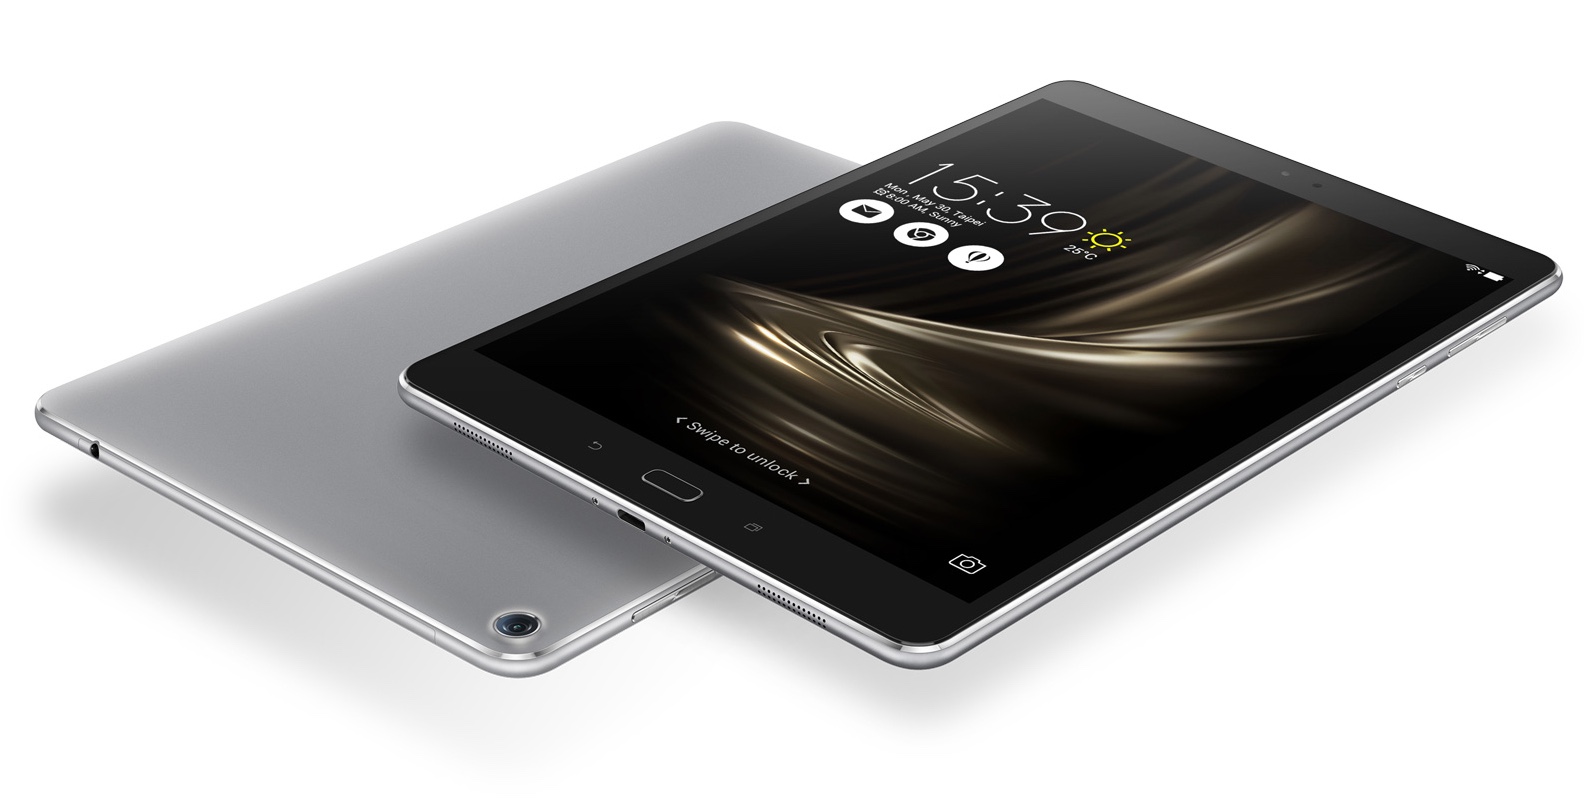 Best Android tablets: Asus ZenPad 3S 10